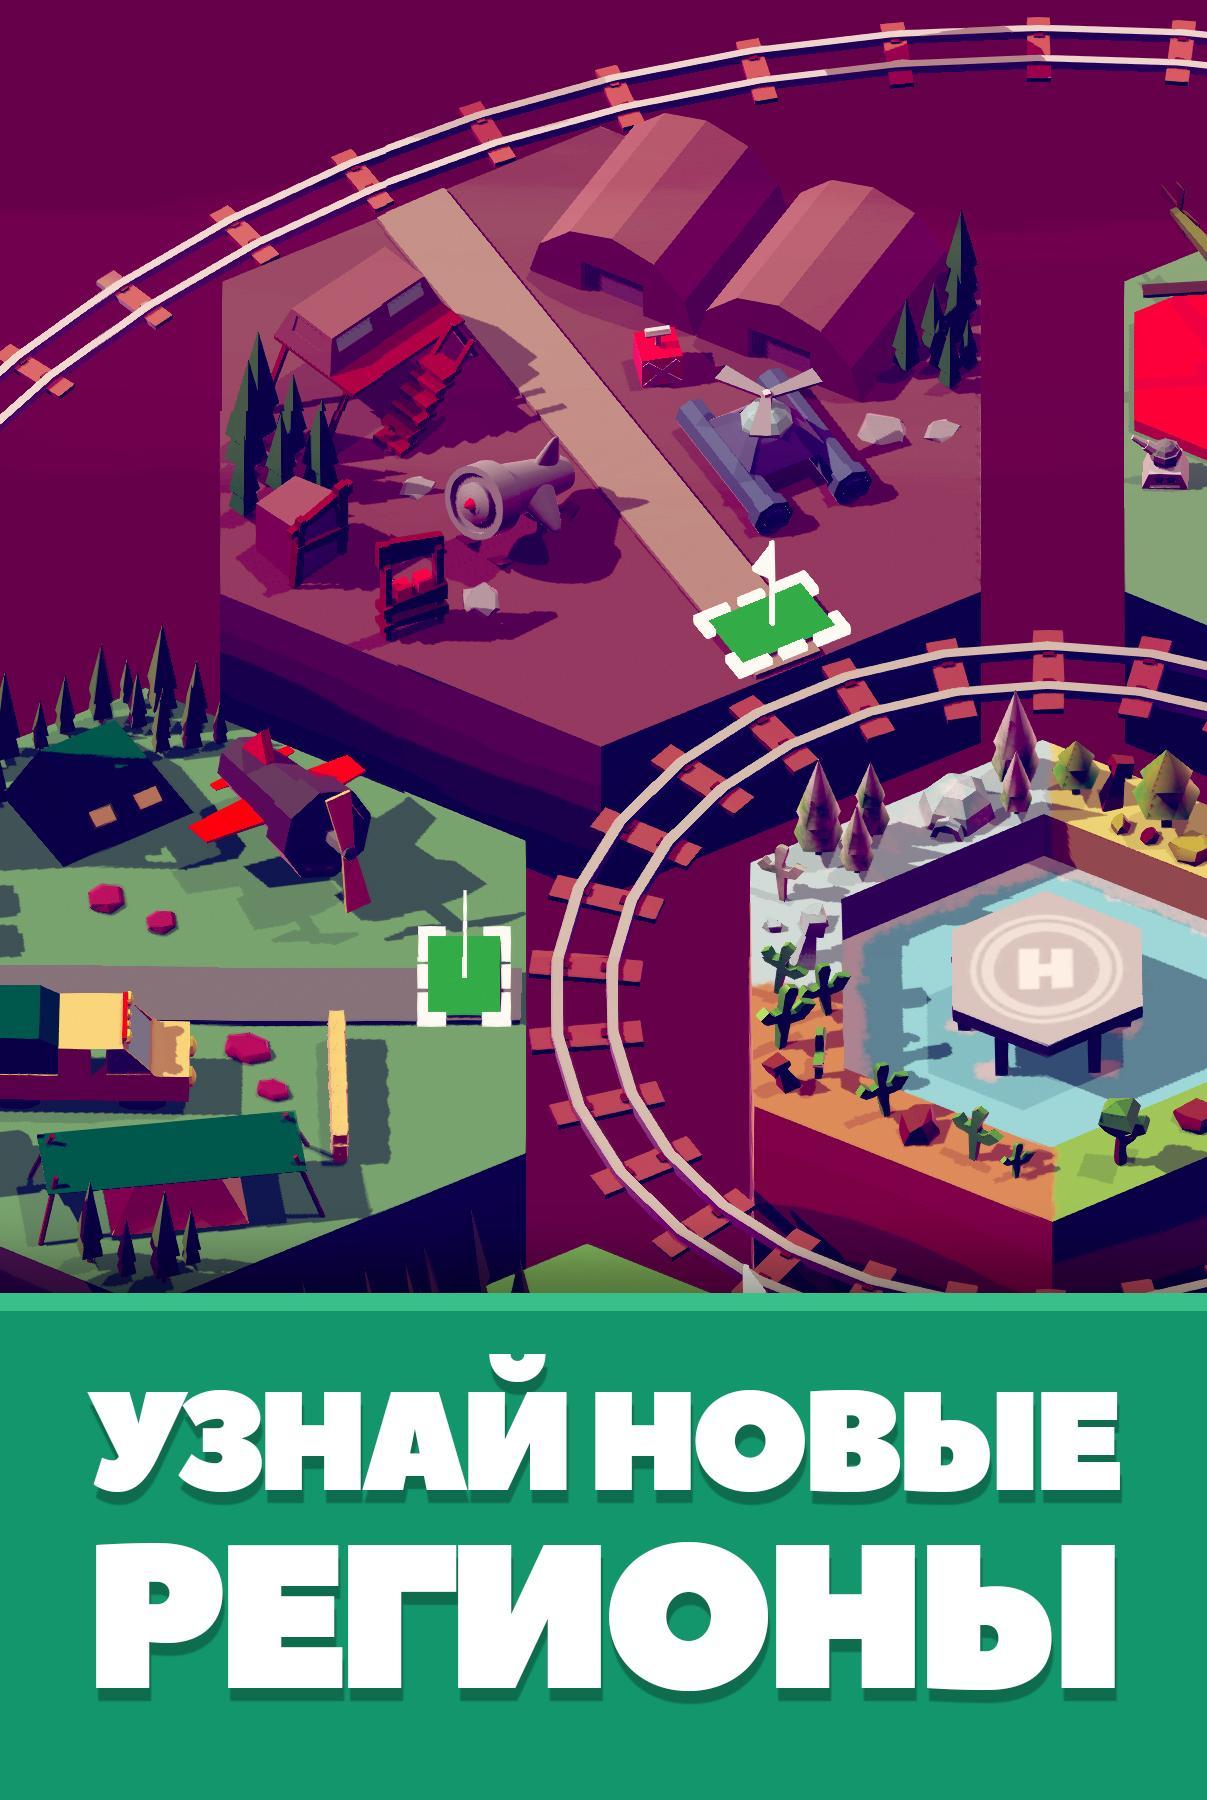 Idle Train Station Tycoon. Money Tycoon. Скетчфаб Loco money Idle Train Tycoon. Tycoon Railroad PLAYSTATION.